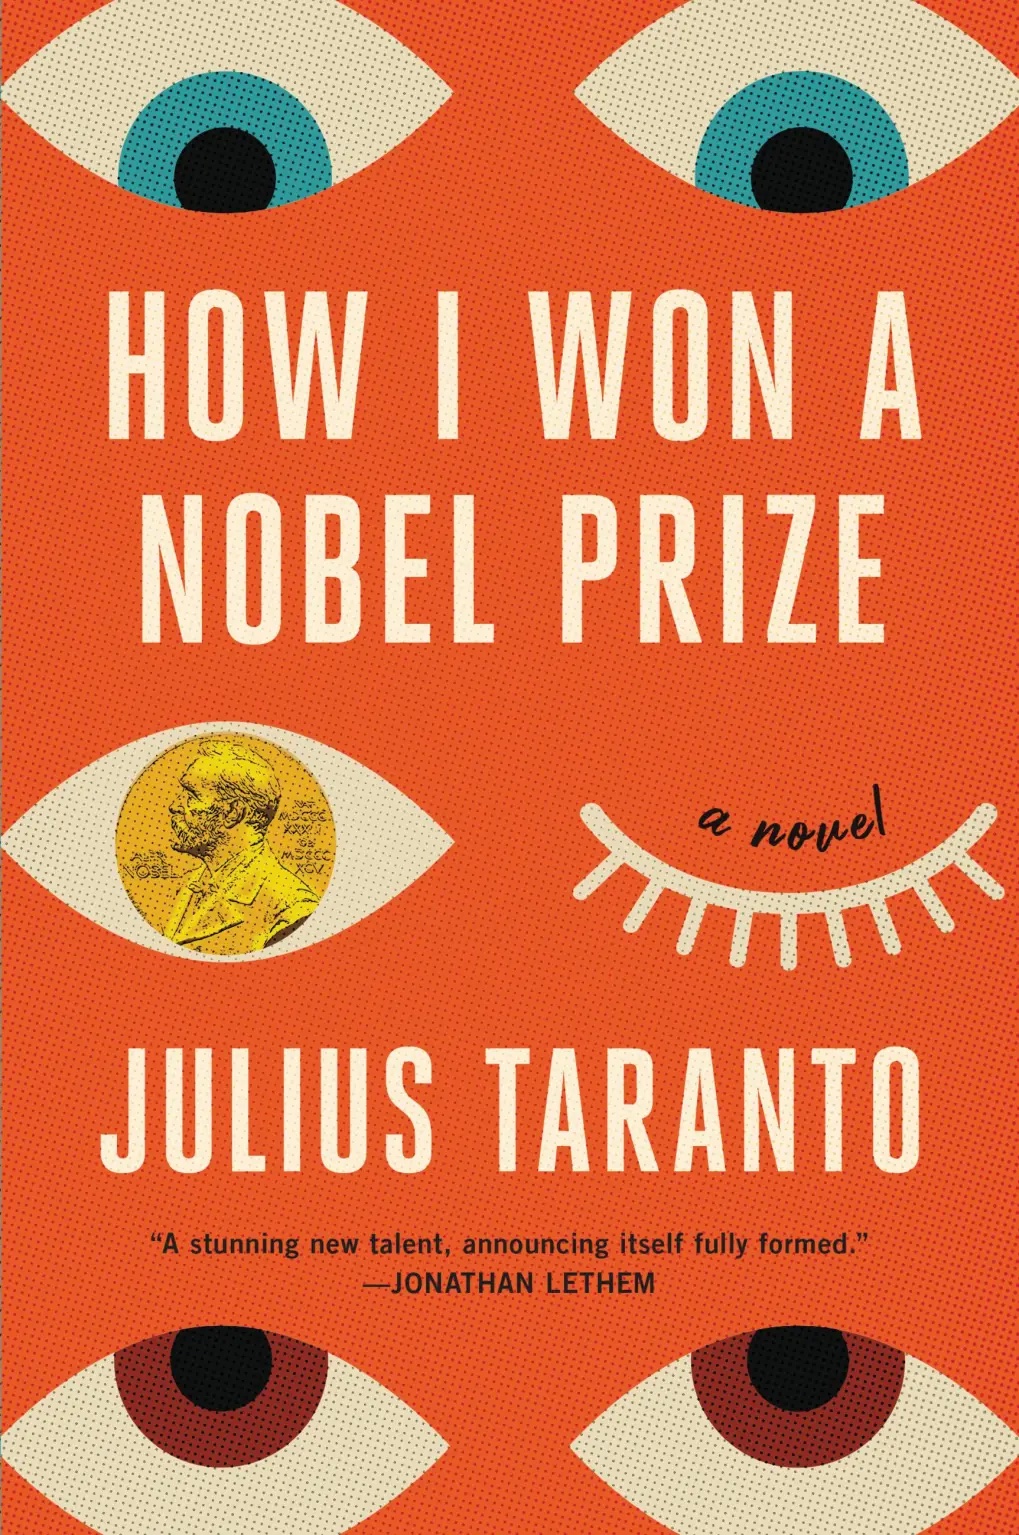 Book Launch: How I Won A Nobel Prize by Julius Taranto in conversation with Tony Tulathimutte